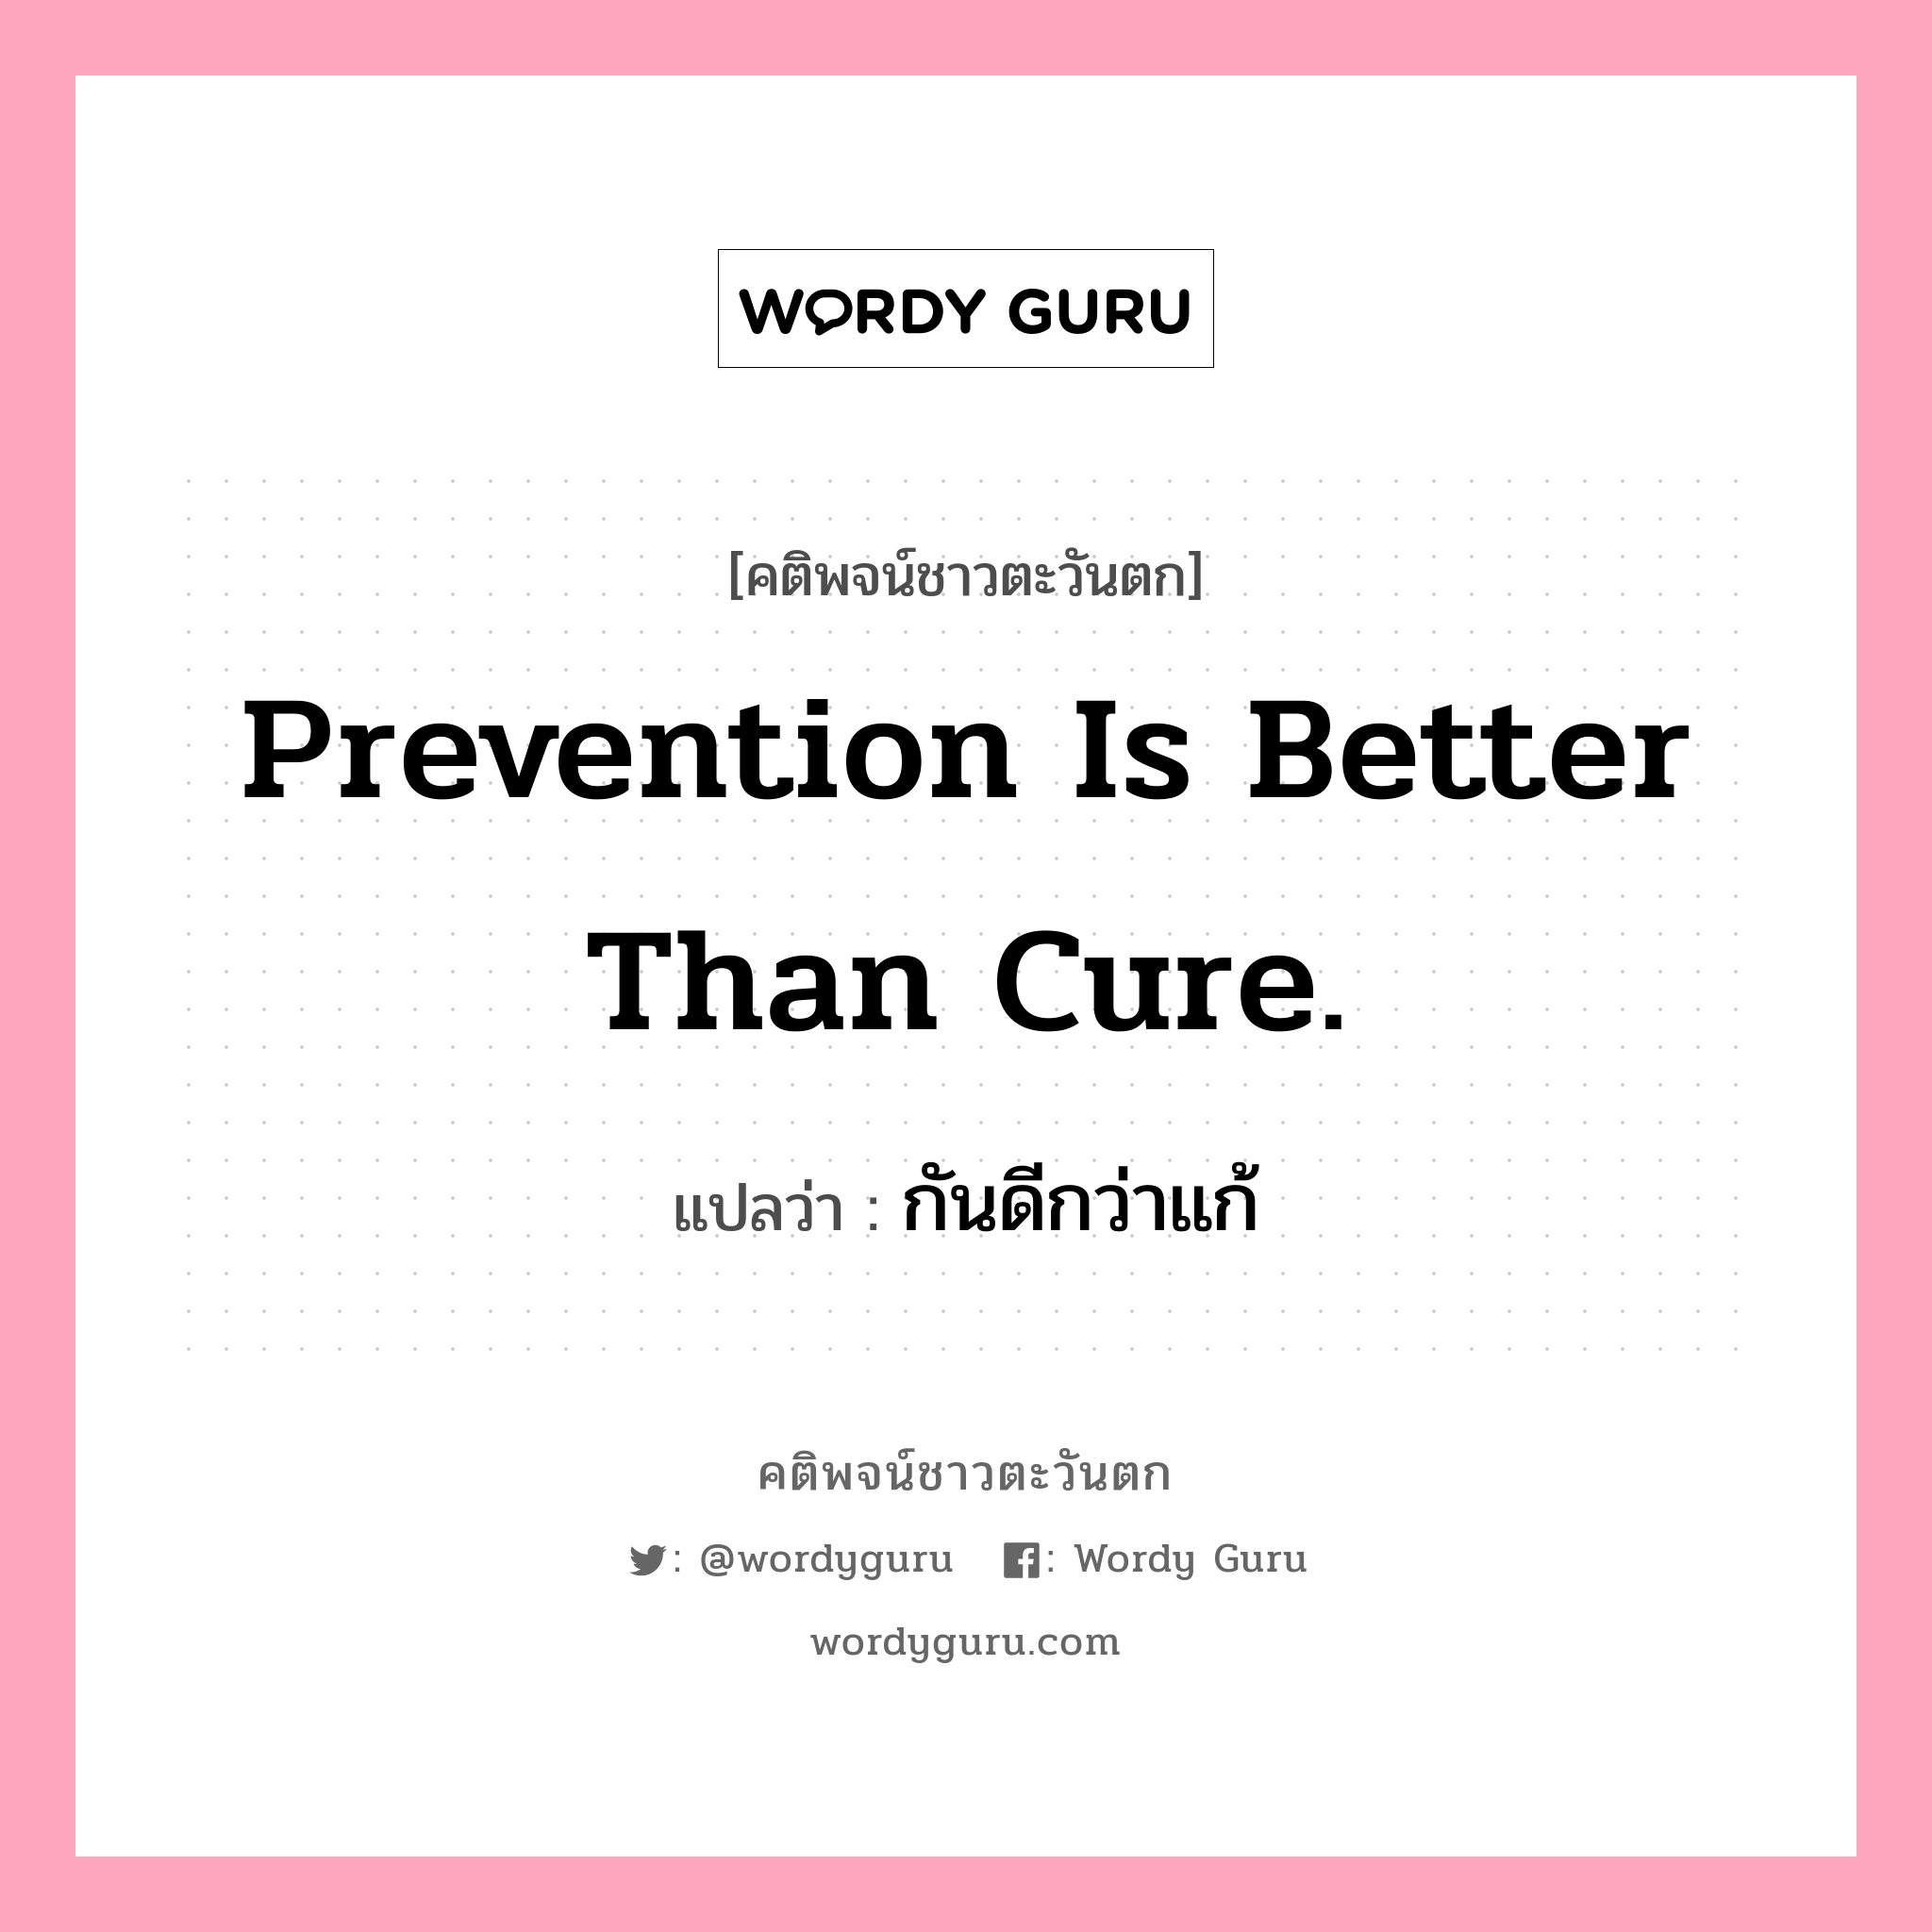 Prevention is better than cure., คติพจน์ชาวตะวันตก Prevention is better than cure. แปลว่า กันดีกว่าแก้